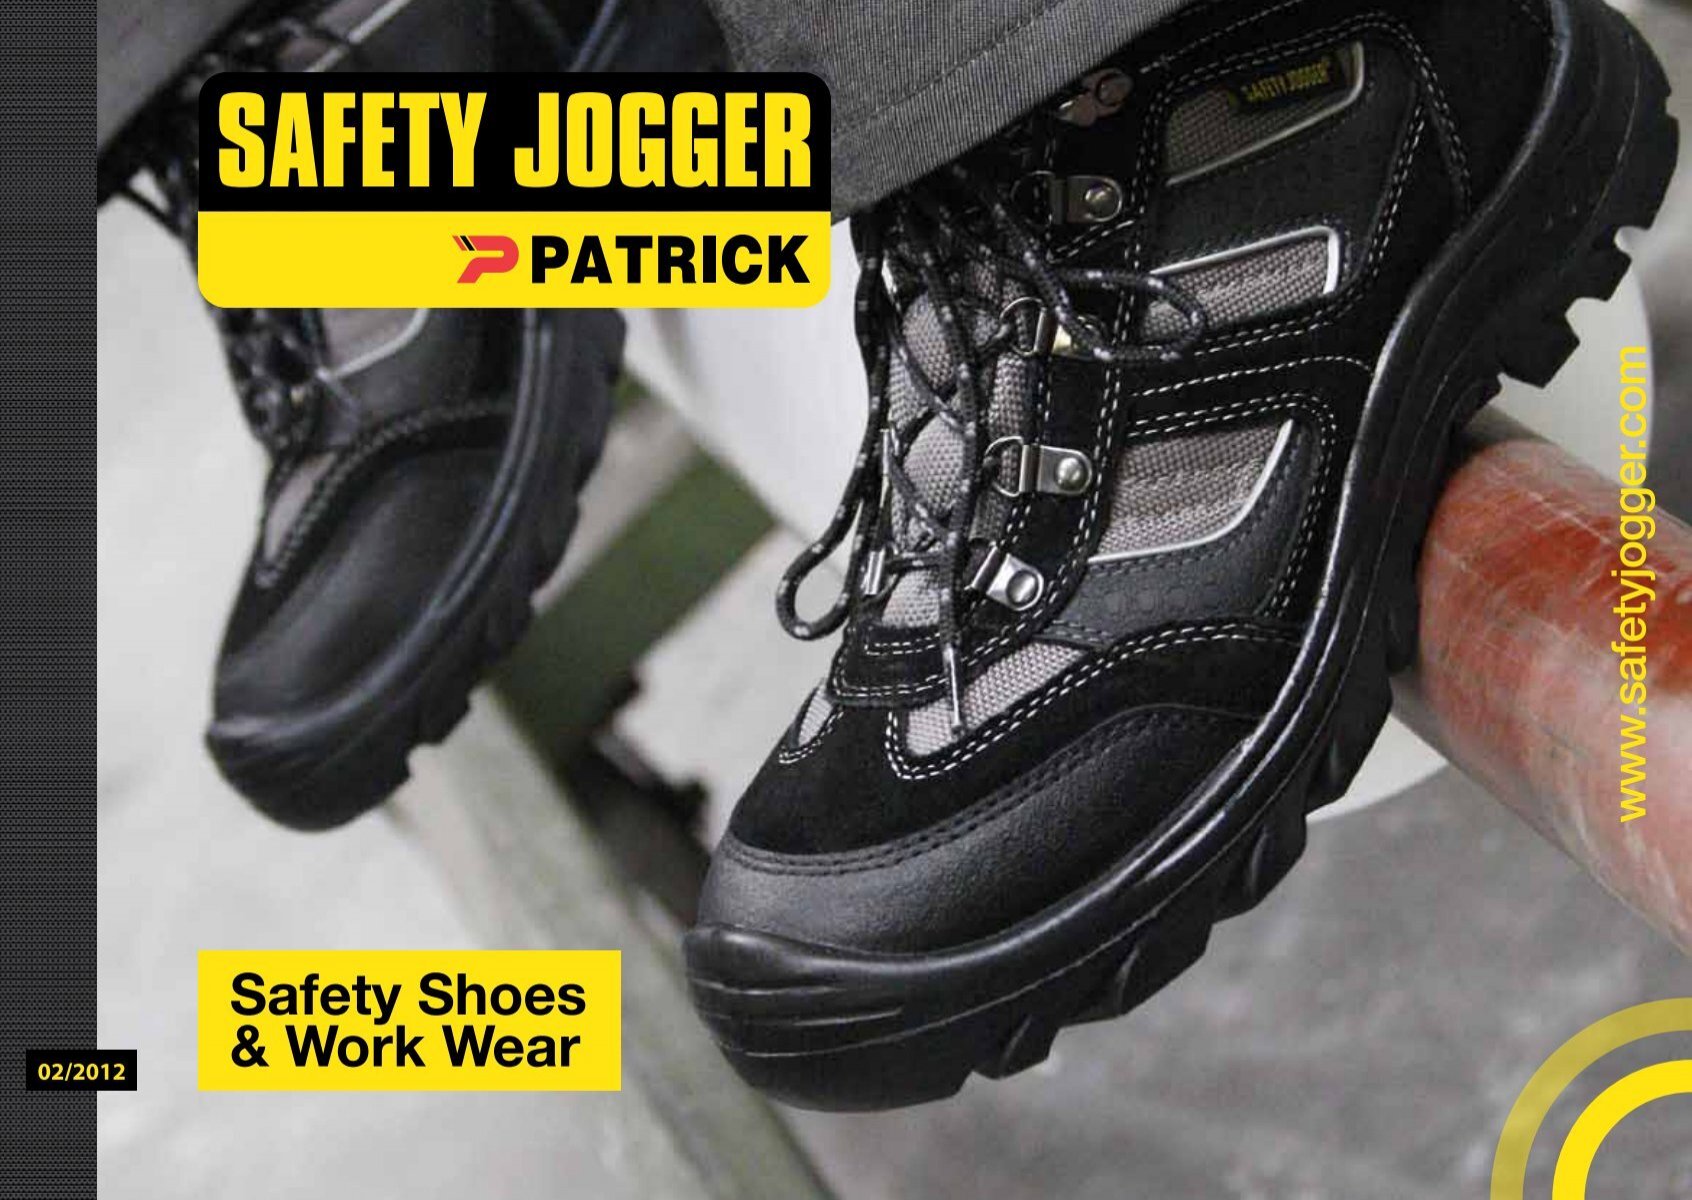 Safety Shoes & Work Wear - Patrick Safety Jogger